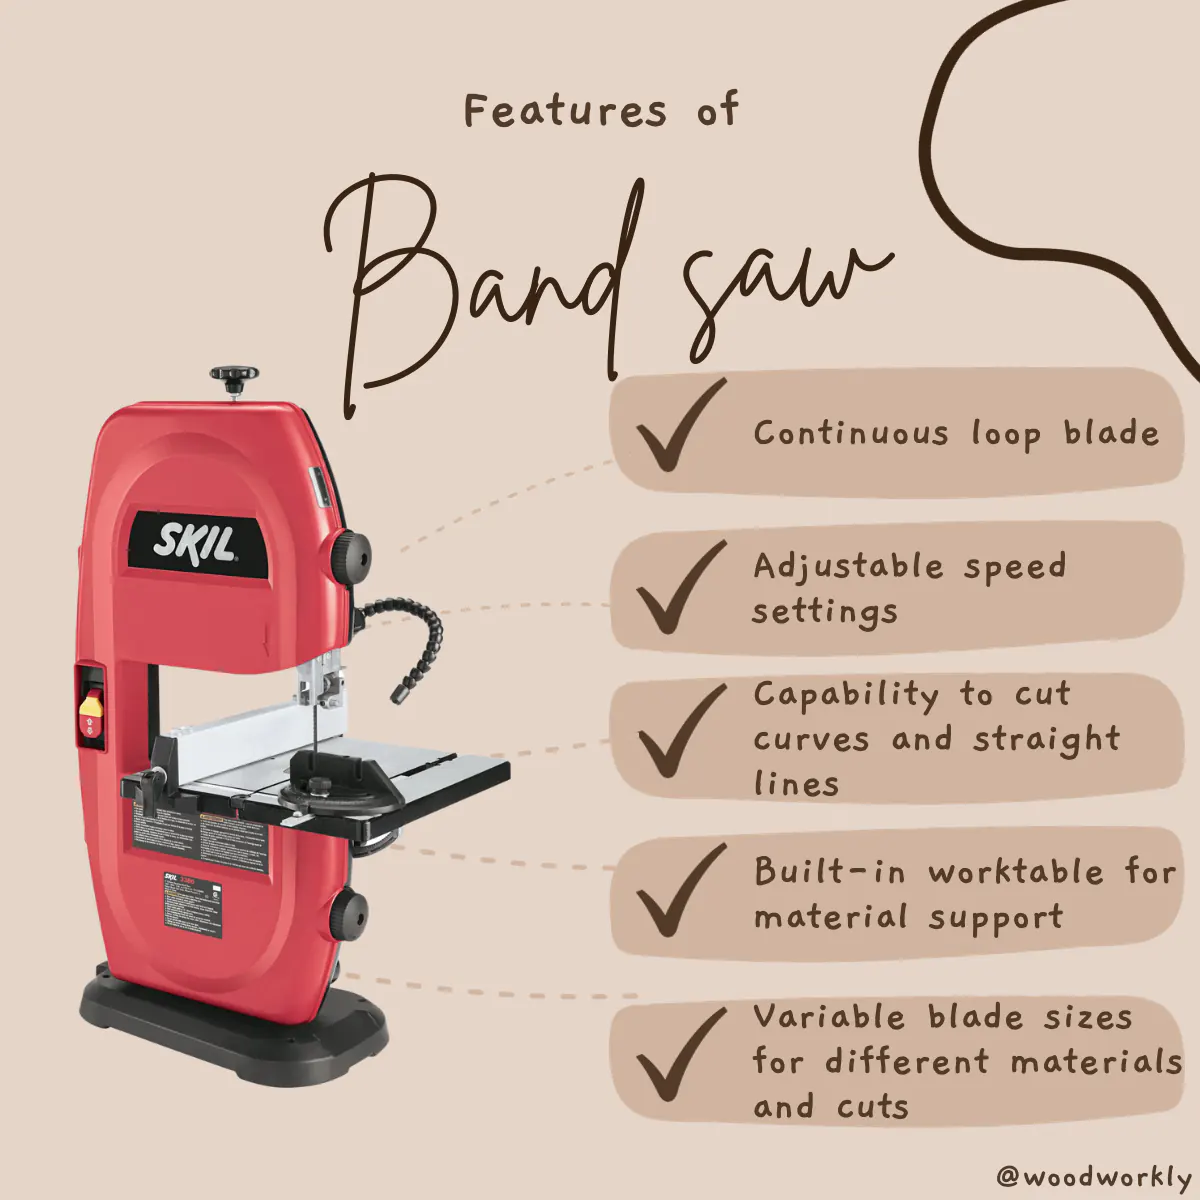 Features of band saw